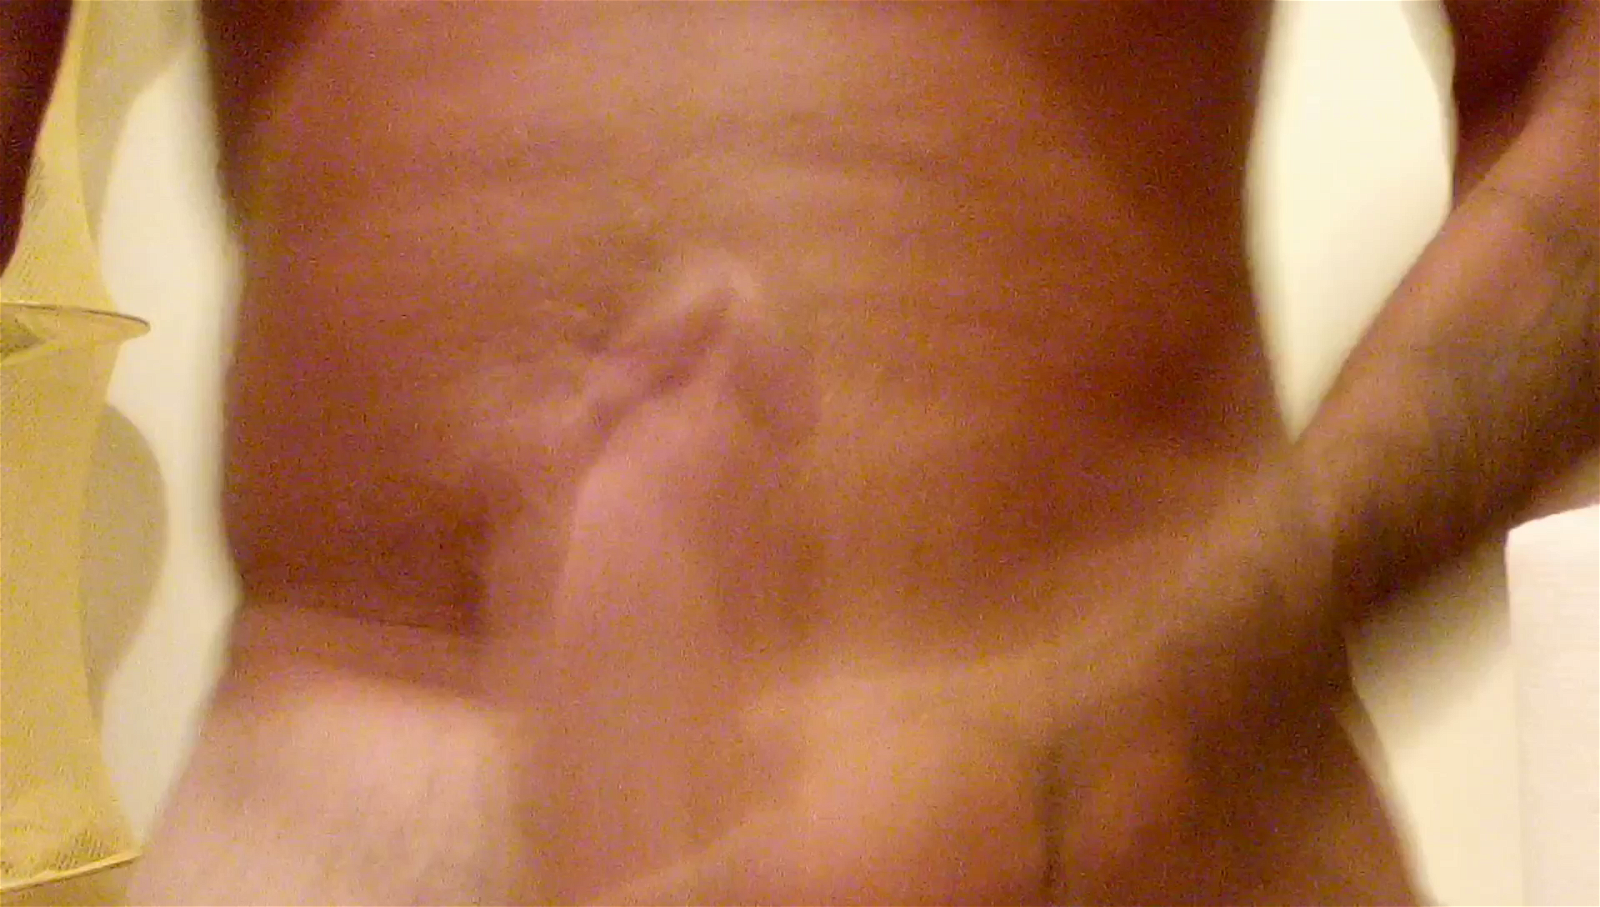 Shared Video by Cumforu with the username @Cumforu,  February 21, 2020 at 11:13 PM. The post is about the topic Masturbation and the text says 'anyone want more cum? ill share my hot cum'